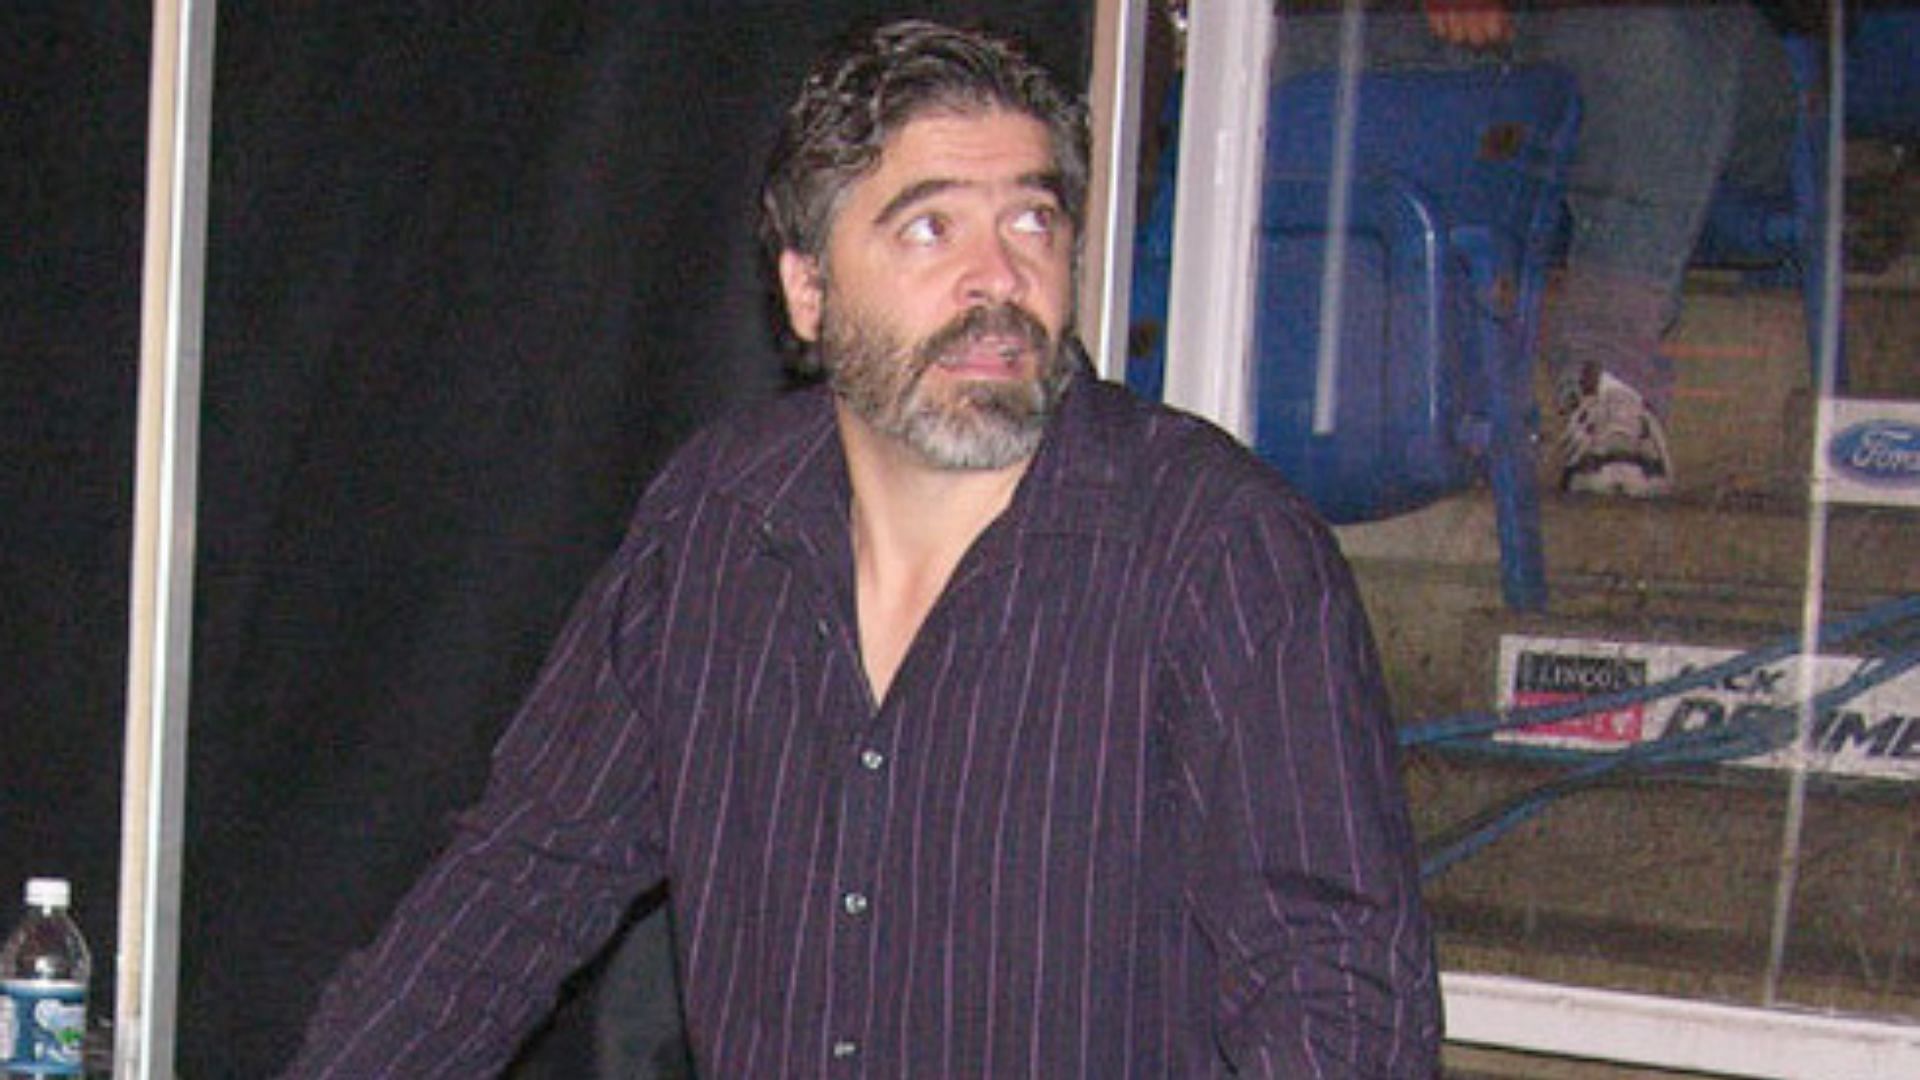 Vince Russo was a former WWE writer and producer